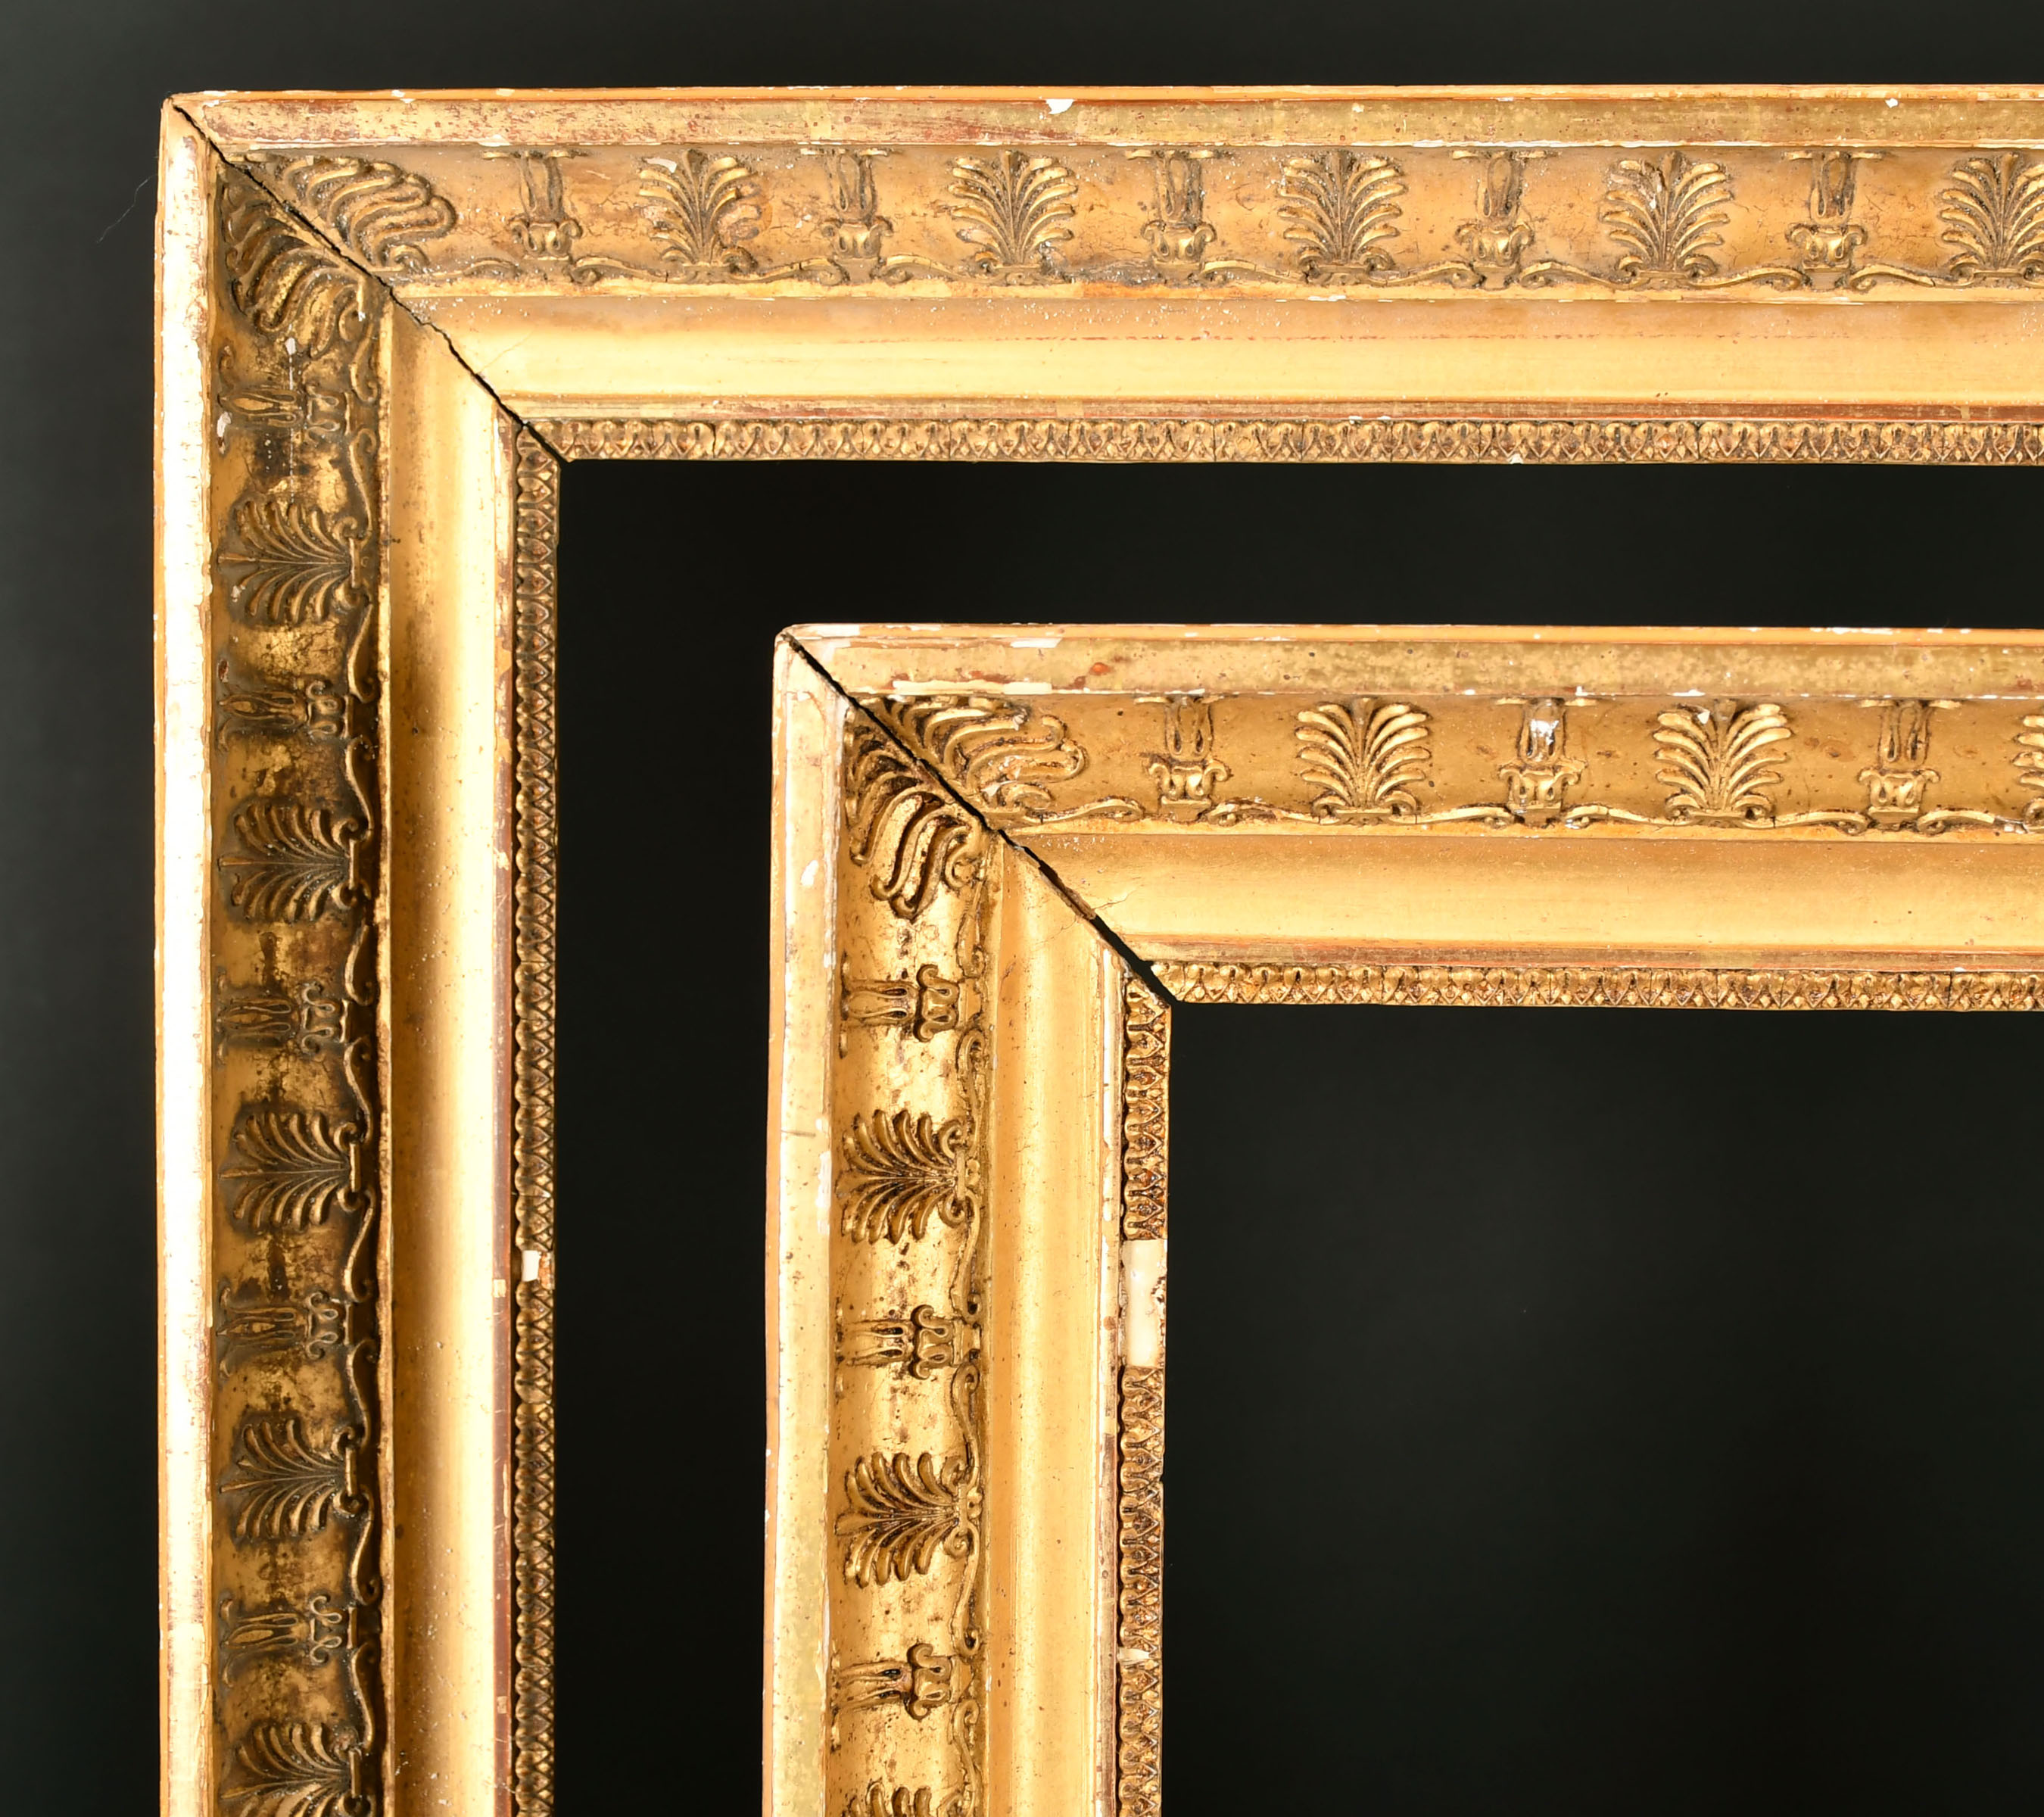 19th Century French School. A Near Pair of Empire Gilt Composition Frames, rebate 28" x 24" (71.1